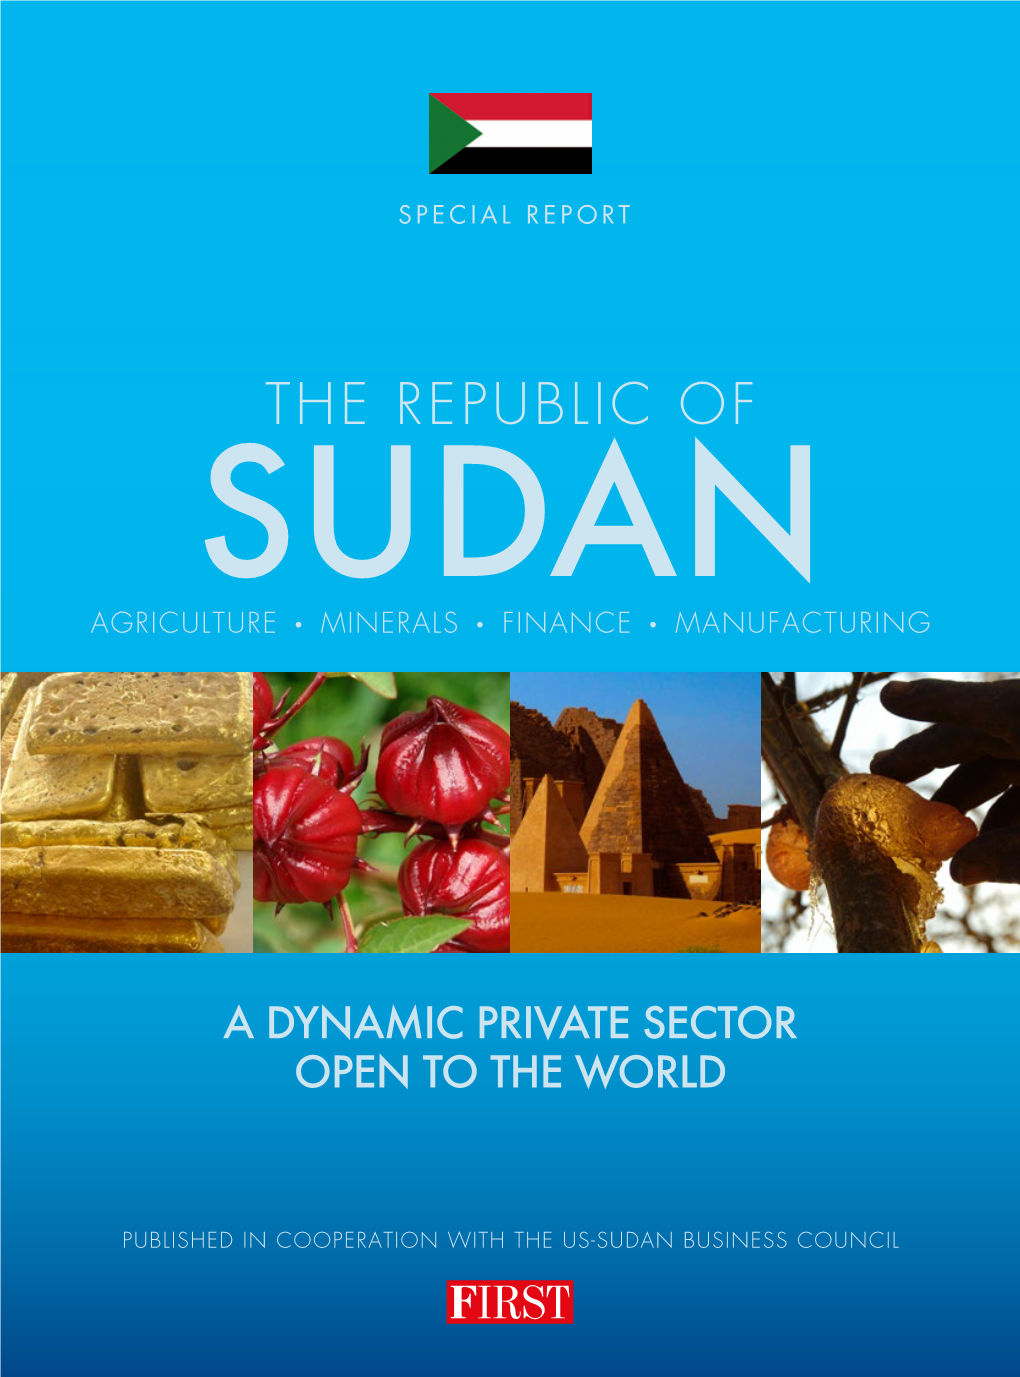 The Republic of Sudan Agriculture • Minerals • Finance • Manufacturing